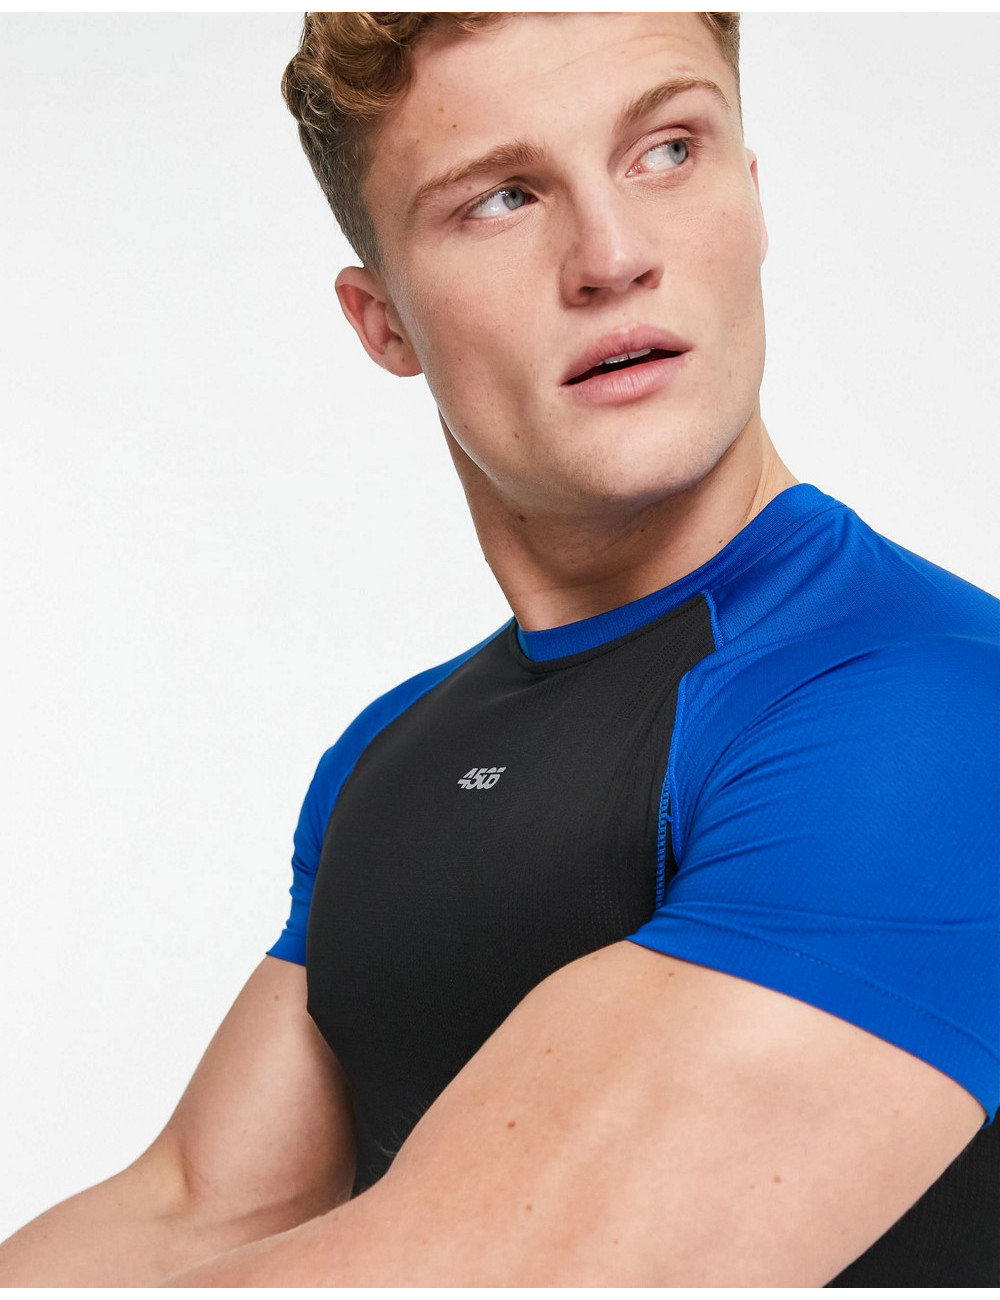 ASOS 4505 muscle fit...